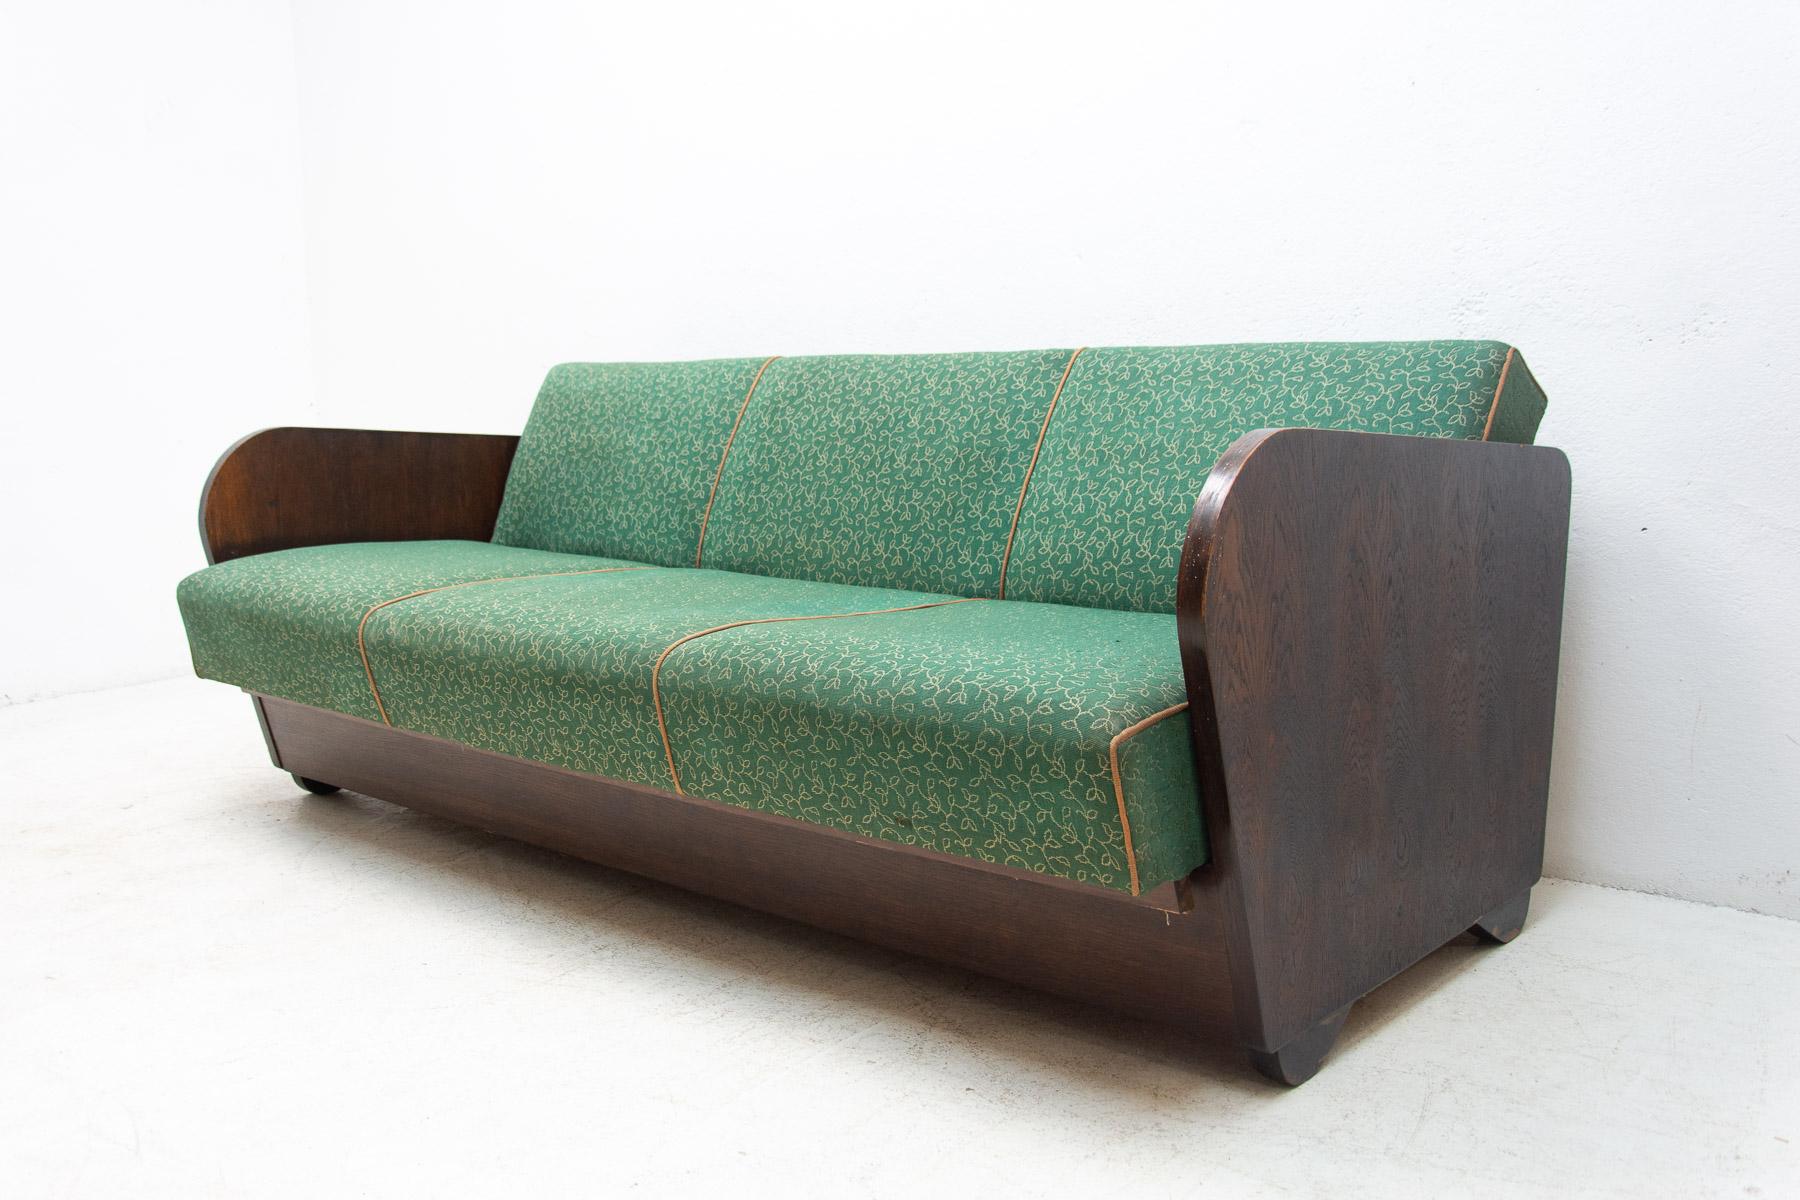 This folding sofabed with storage space was designed by the famous Czechoslovak architect Jindřich Halabala in the 1950´s. Very attractive and simple design. The construction is of beech wood. Overall in good Vintage condition, showing signs of age